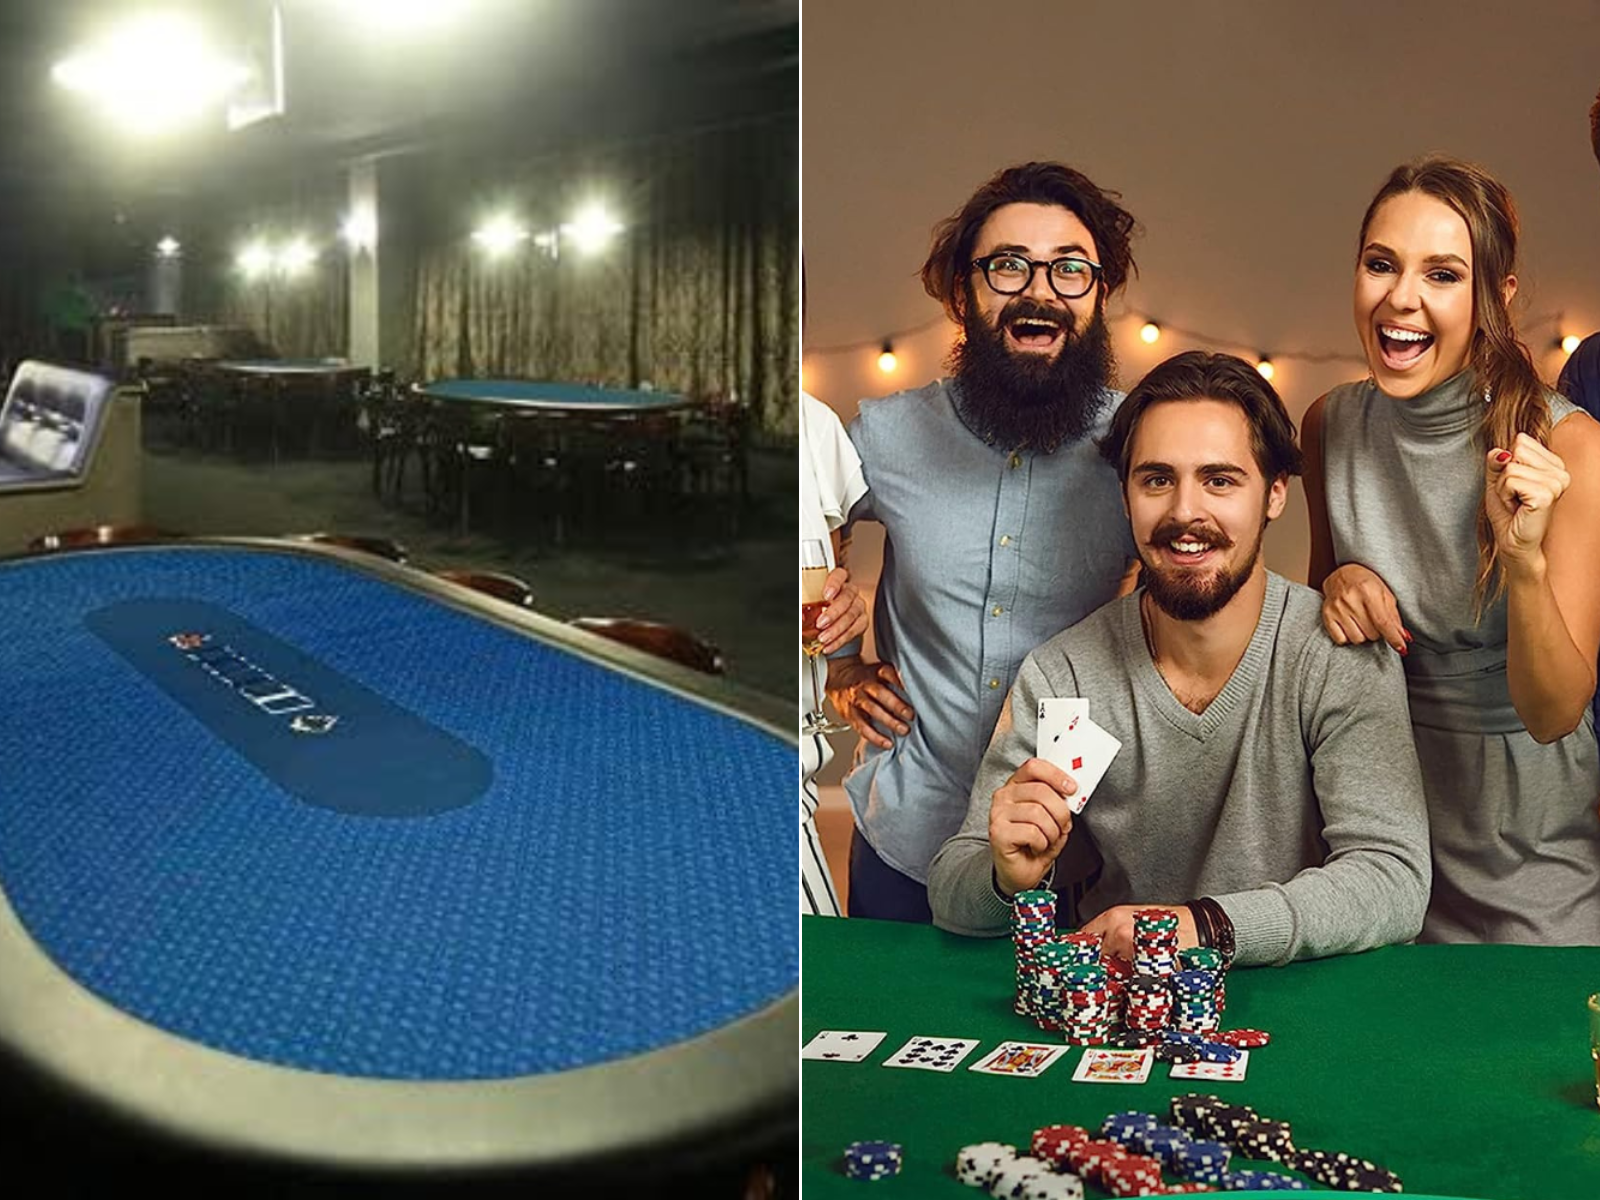 3 blue felt poker tables, a group of people at a felt poker table with chips and drinks.